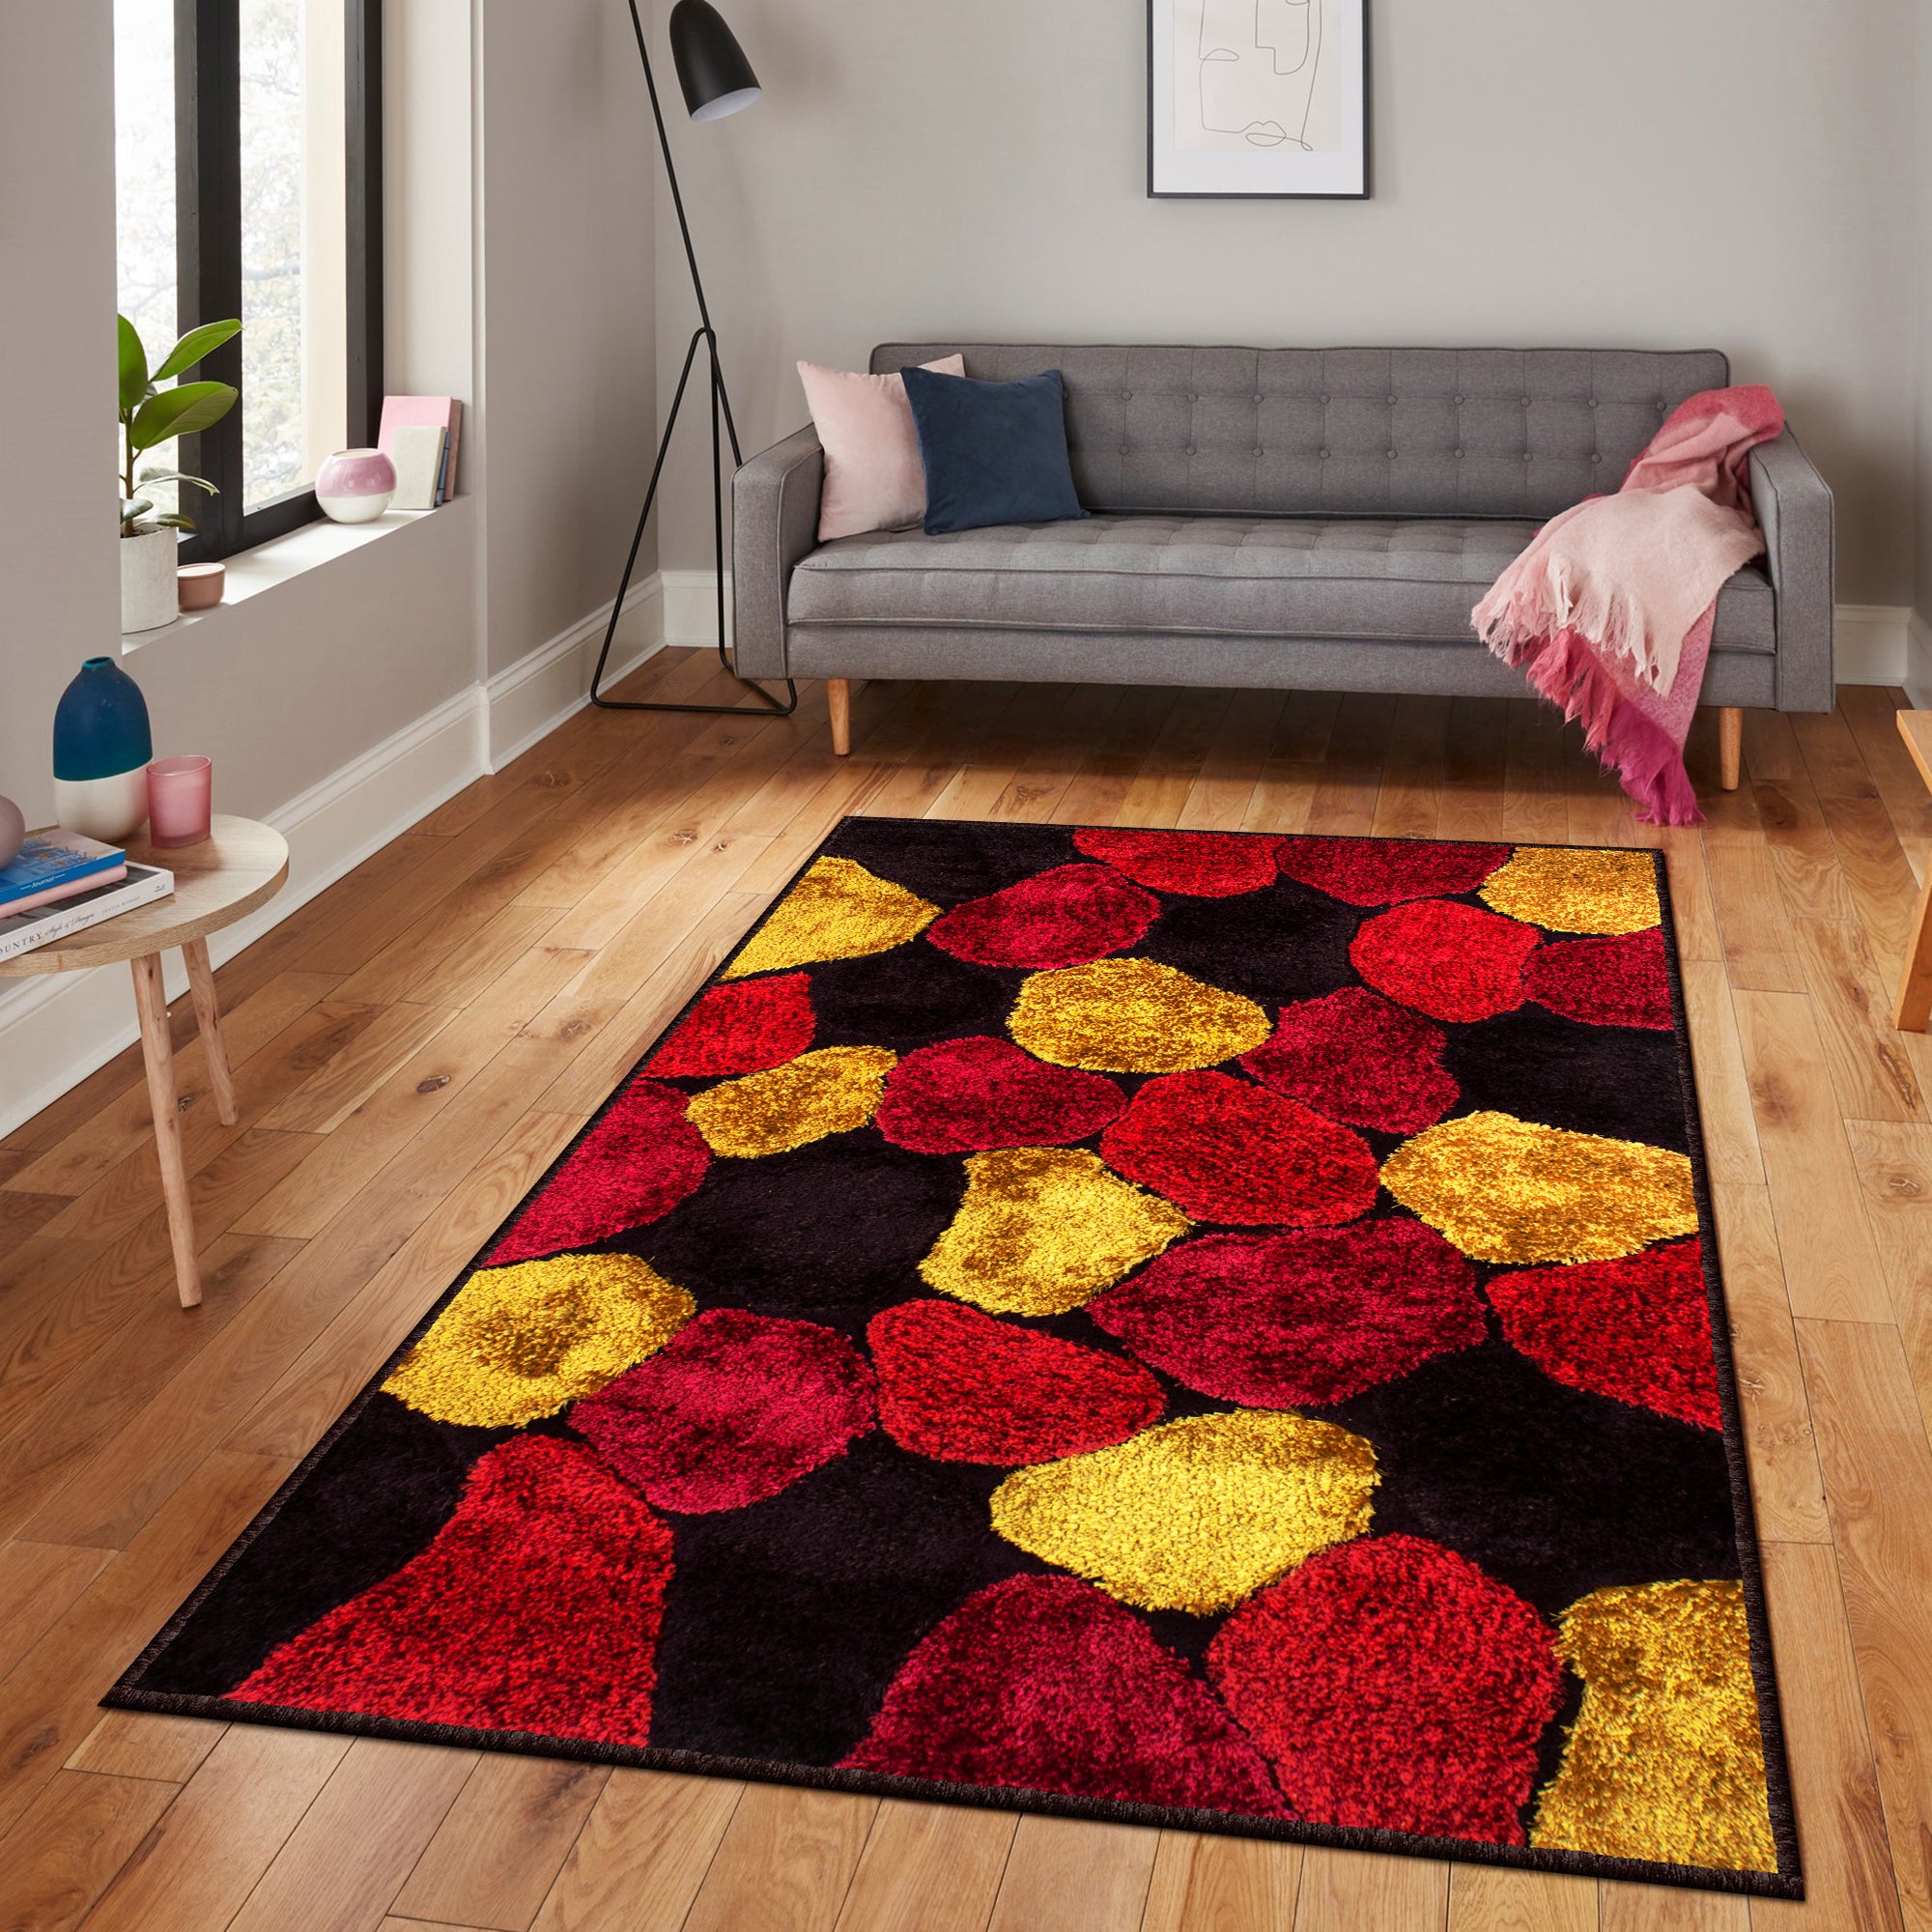 Story@Home Stone Pattern Red 1 PC Carpet